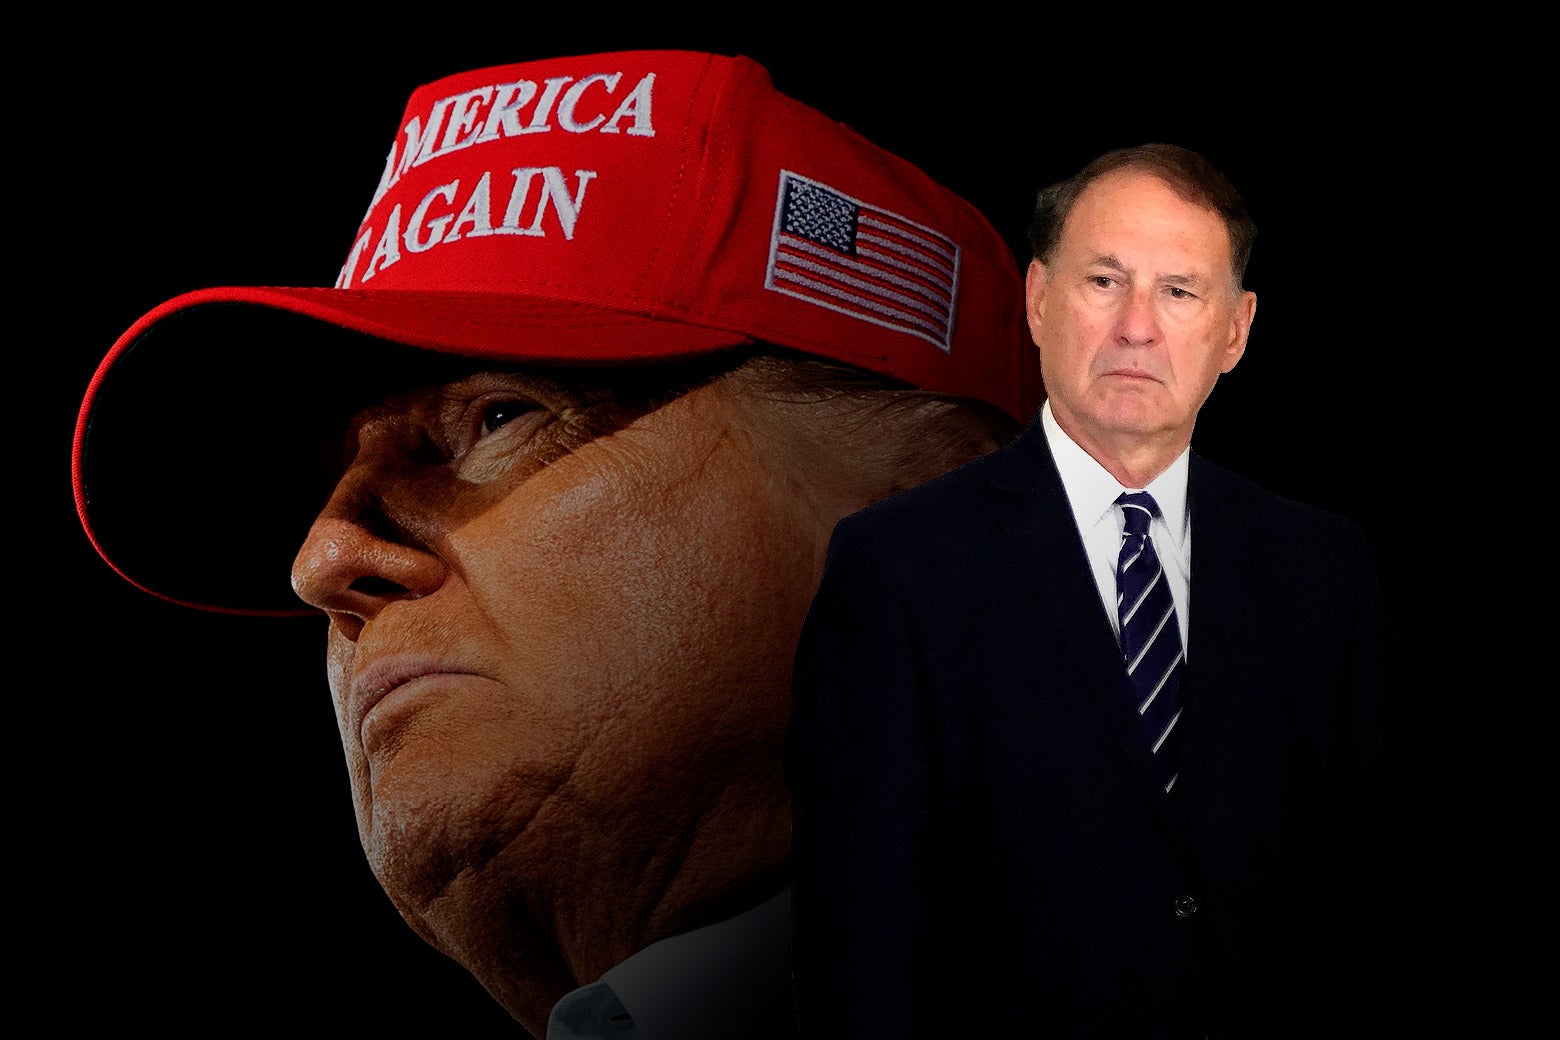 A Supreme Court Justice Gave Us Alarming New Evidence That He’s Living in MAGA World Dahlia Lithwick and Mark Joseph Stern